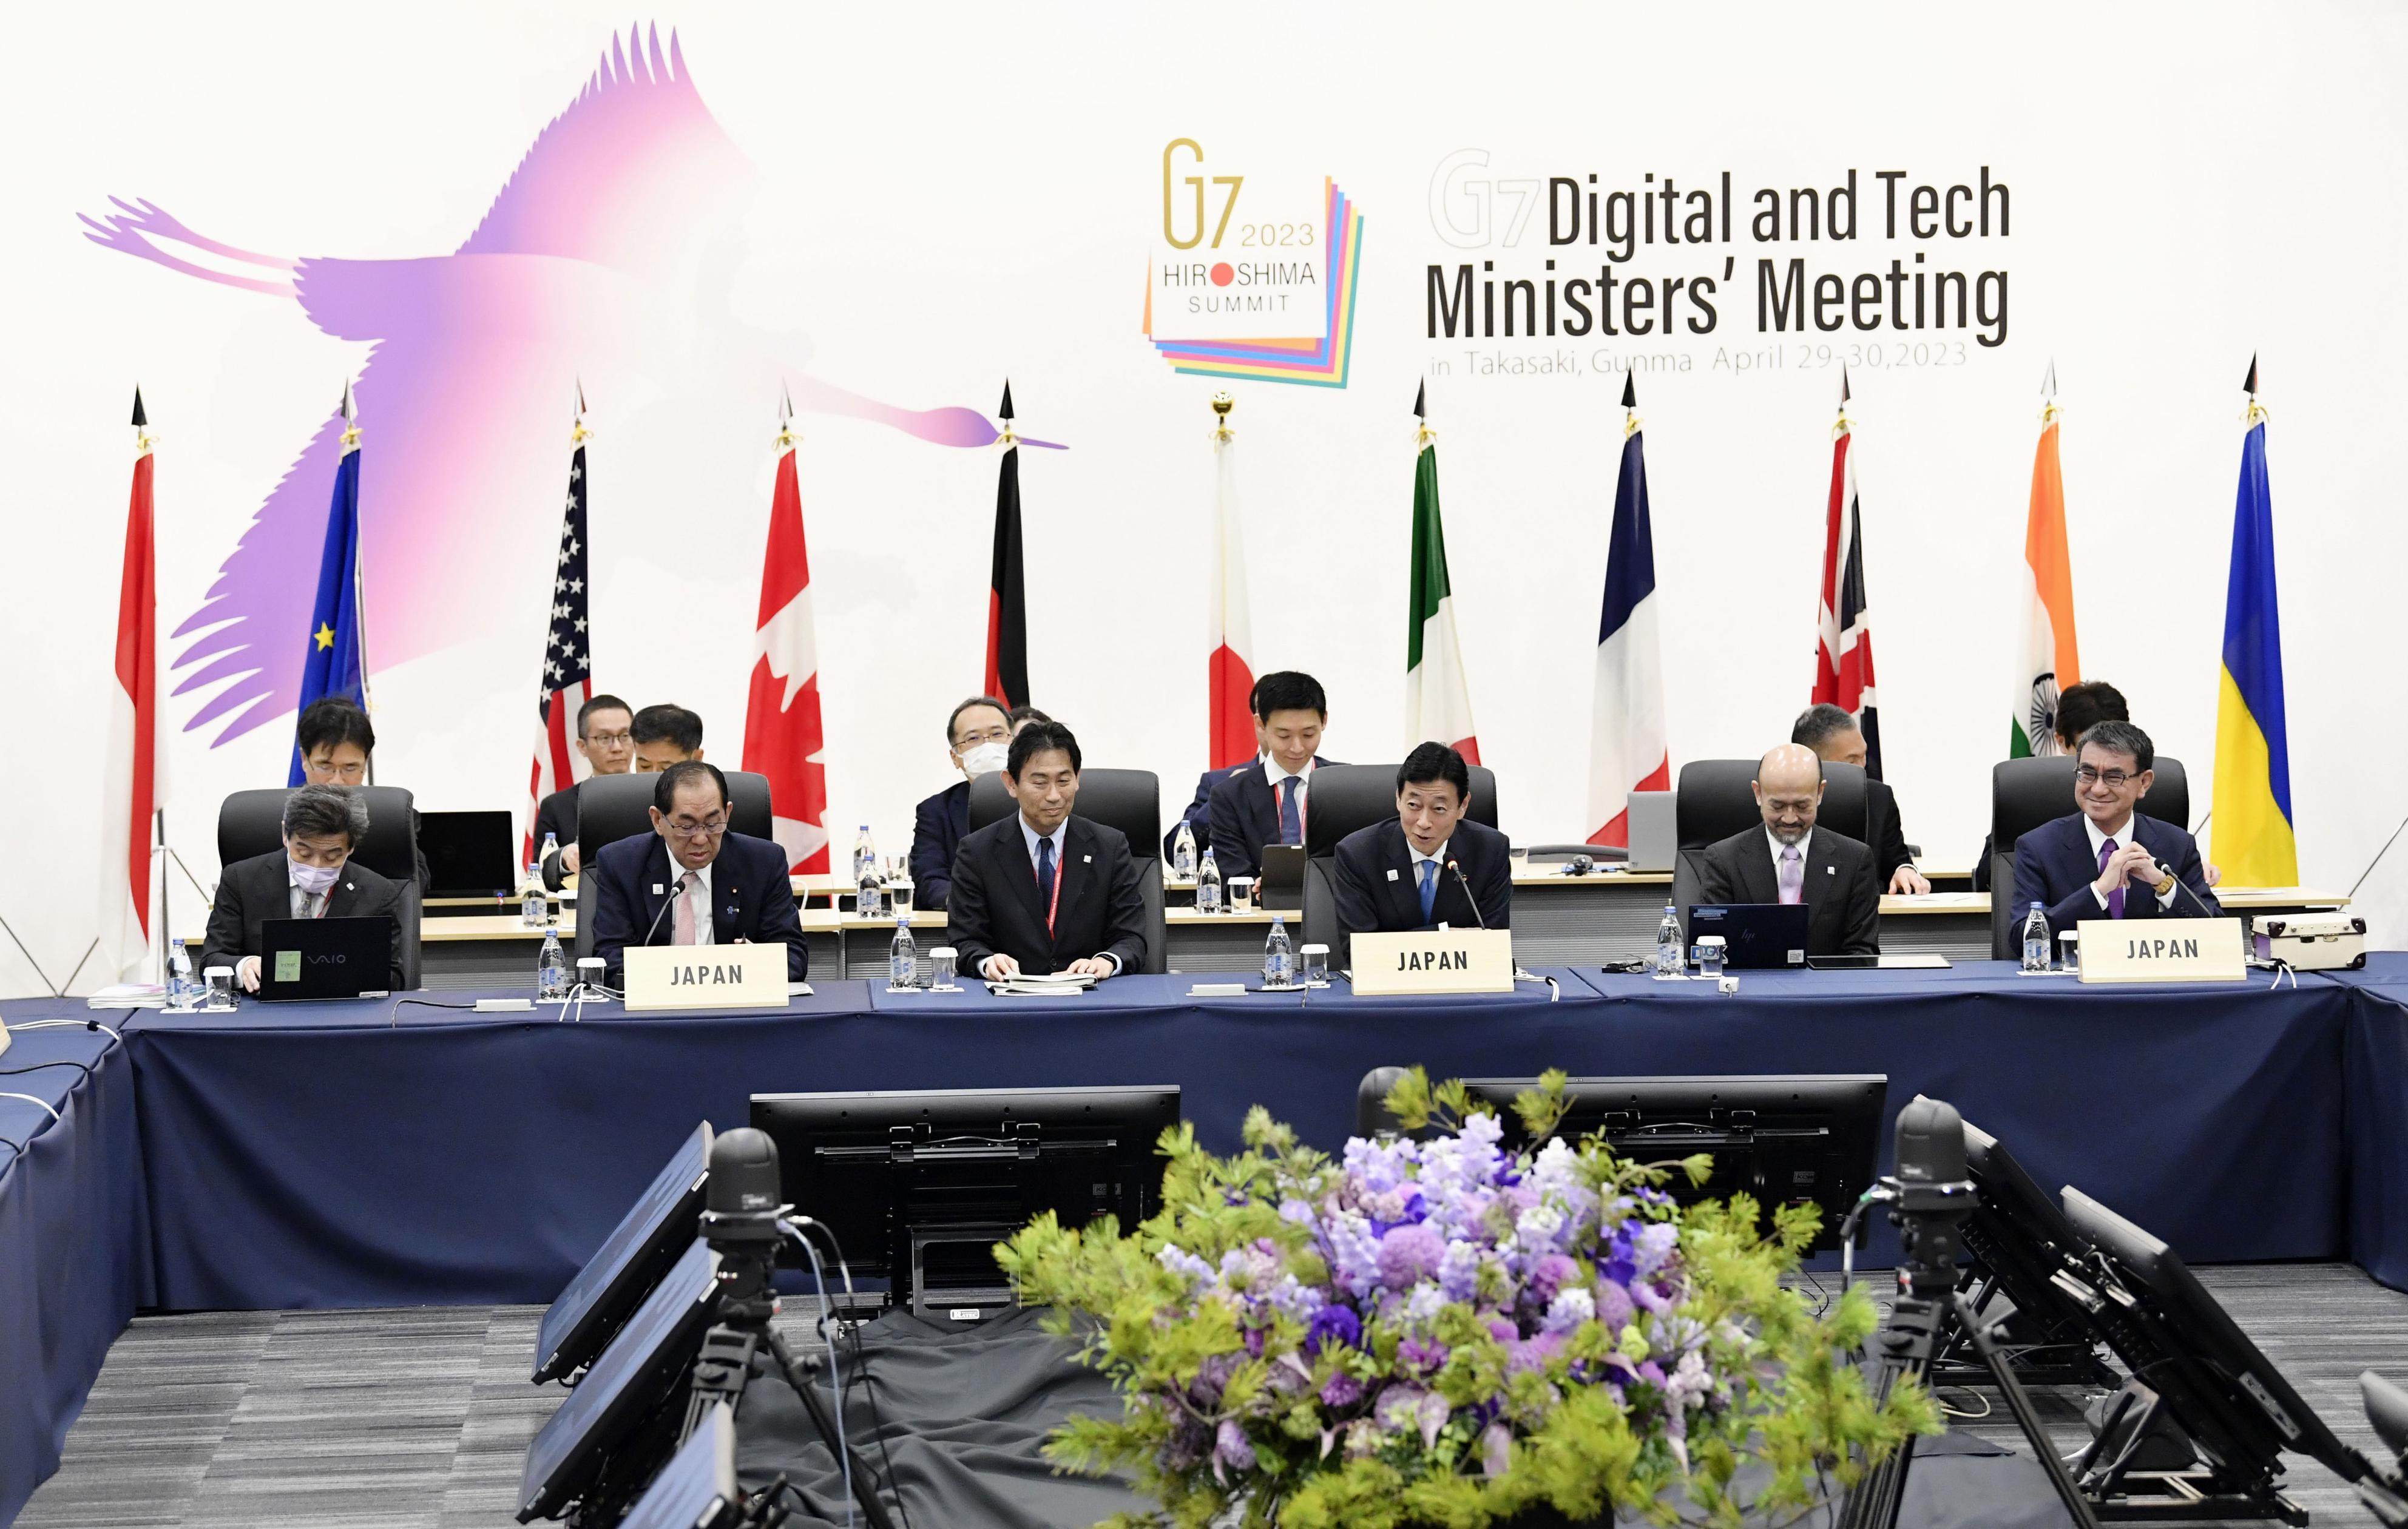 The first day of a two-day meeting of the Group of Seven digital and technology ministers in Takasaki, Gunma Prefecture, eastern Japan. Photo: Kyodo